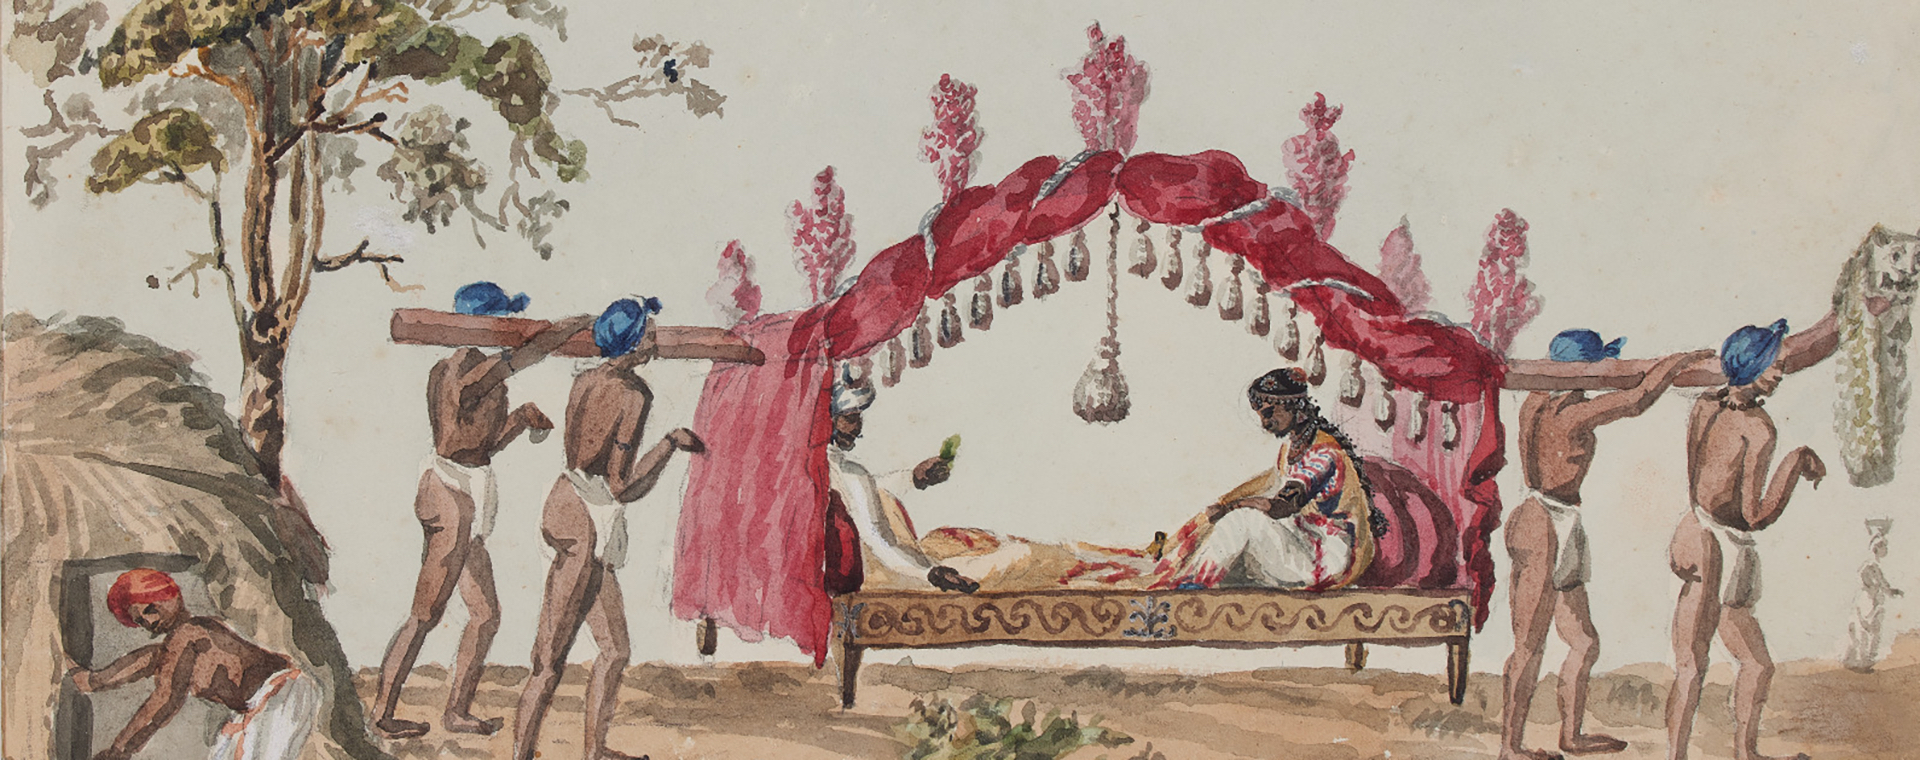 A man and woman sit in a palanquin draped in red cloth with plumes of red feathers and white tassels along the top with one larger tassel in the centre, and a decorative animal head at the end of the front carrying pole; carried by 4 men in loincloths and blue head coverings; a tree to the left, behind a man entering a straw hut.